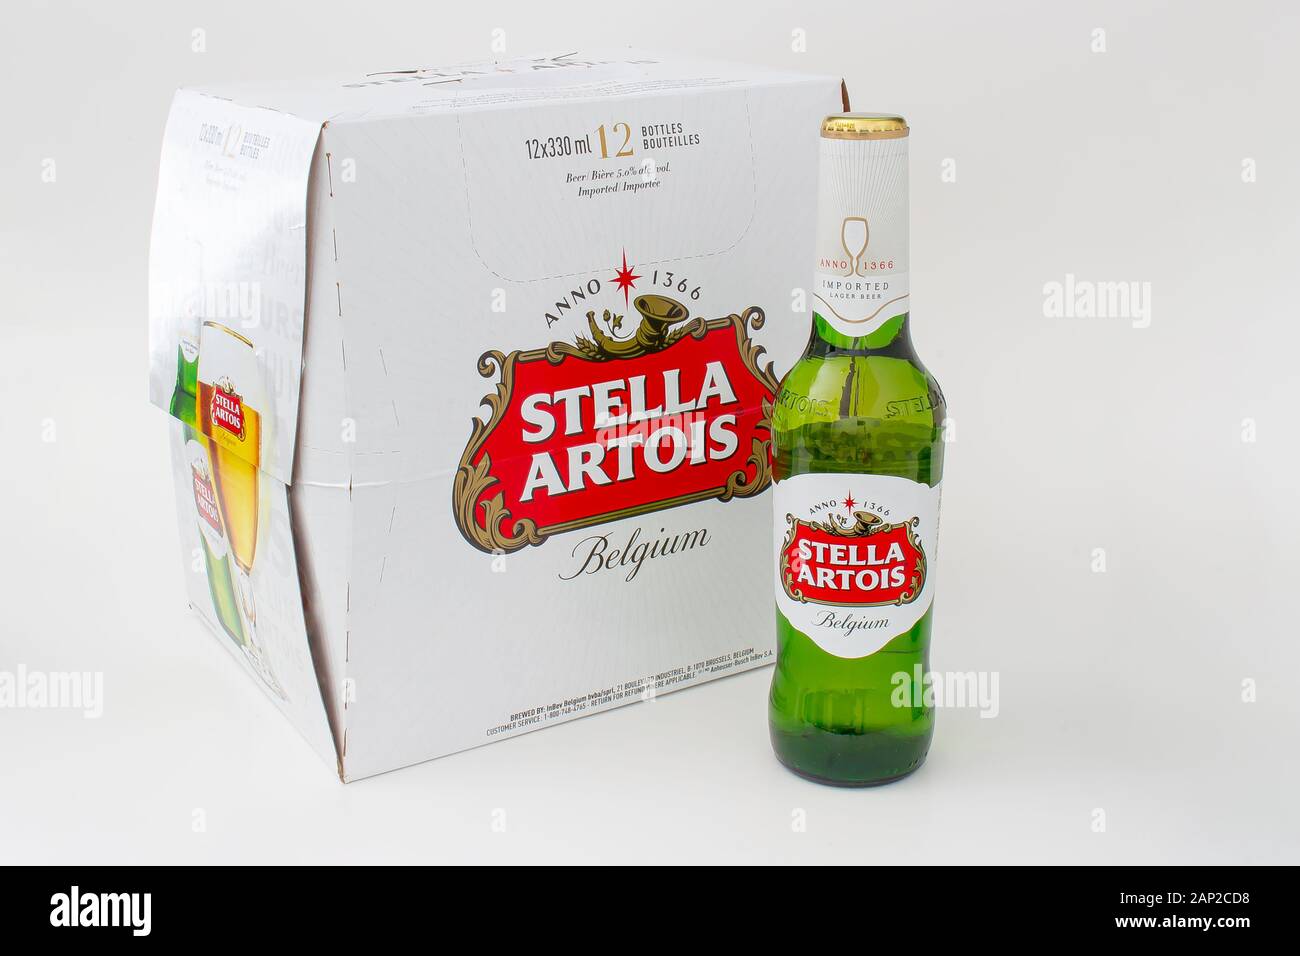 A box of Stella Artois beer with a bottle on the side Stock Photo